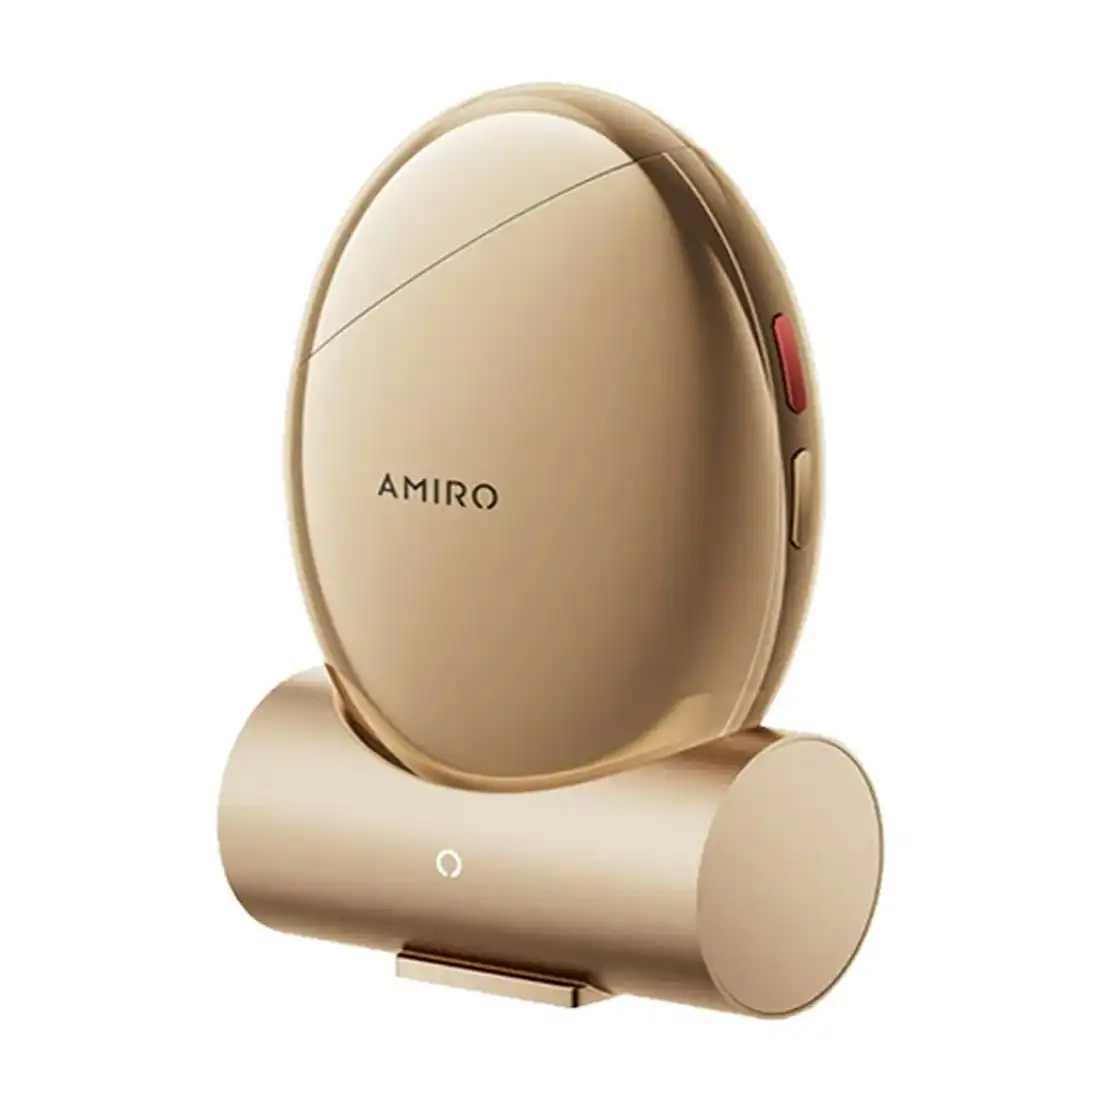 AMIRO S1 Facial RF Skin Tightening Device - Gold Limited Edition (Global Version)